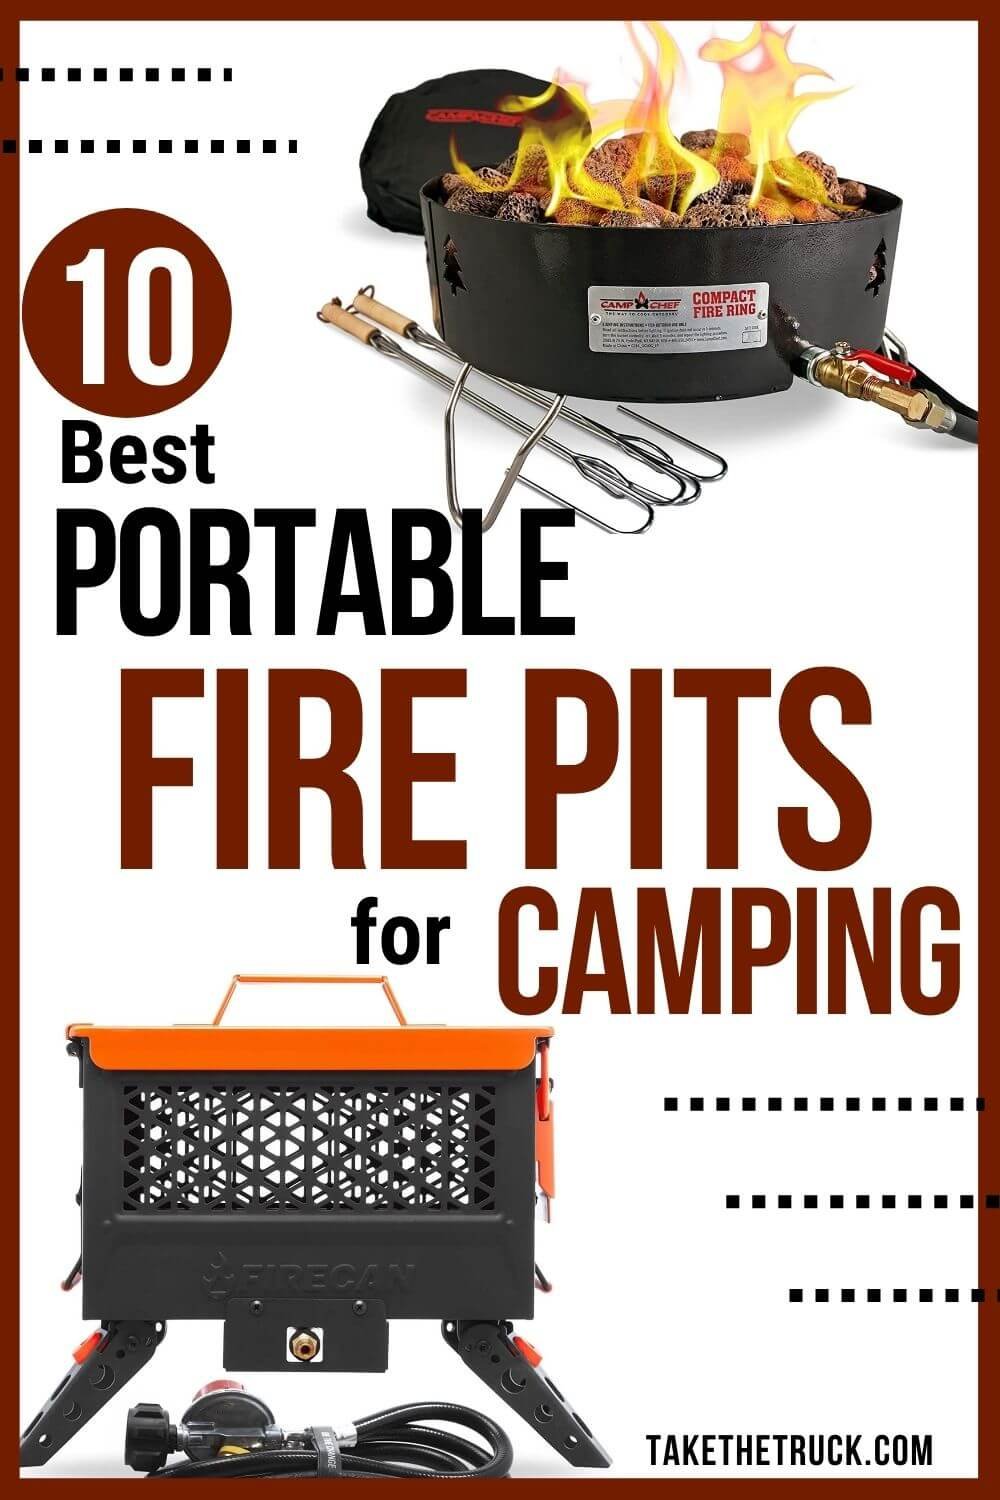 wood burning camping fire pit - Best portable fire pit for camping - portable camping fire pit - portable fireplace for camping - portable propane fire pit for camping